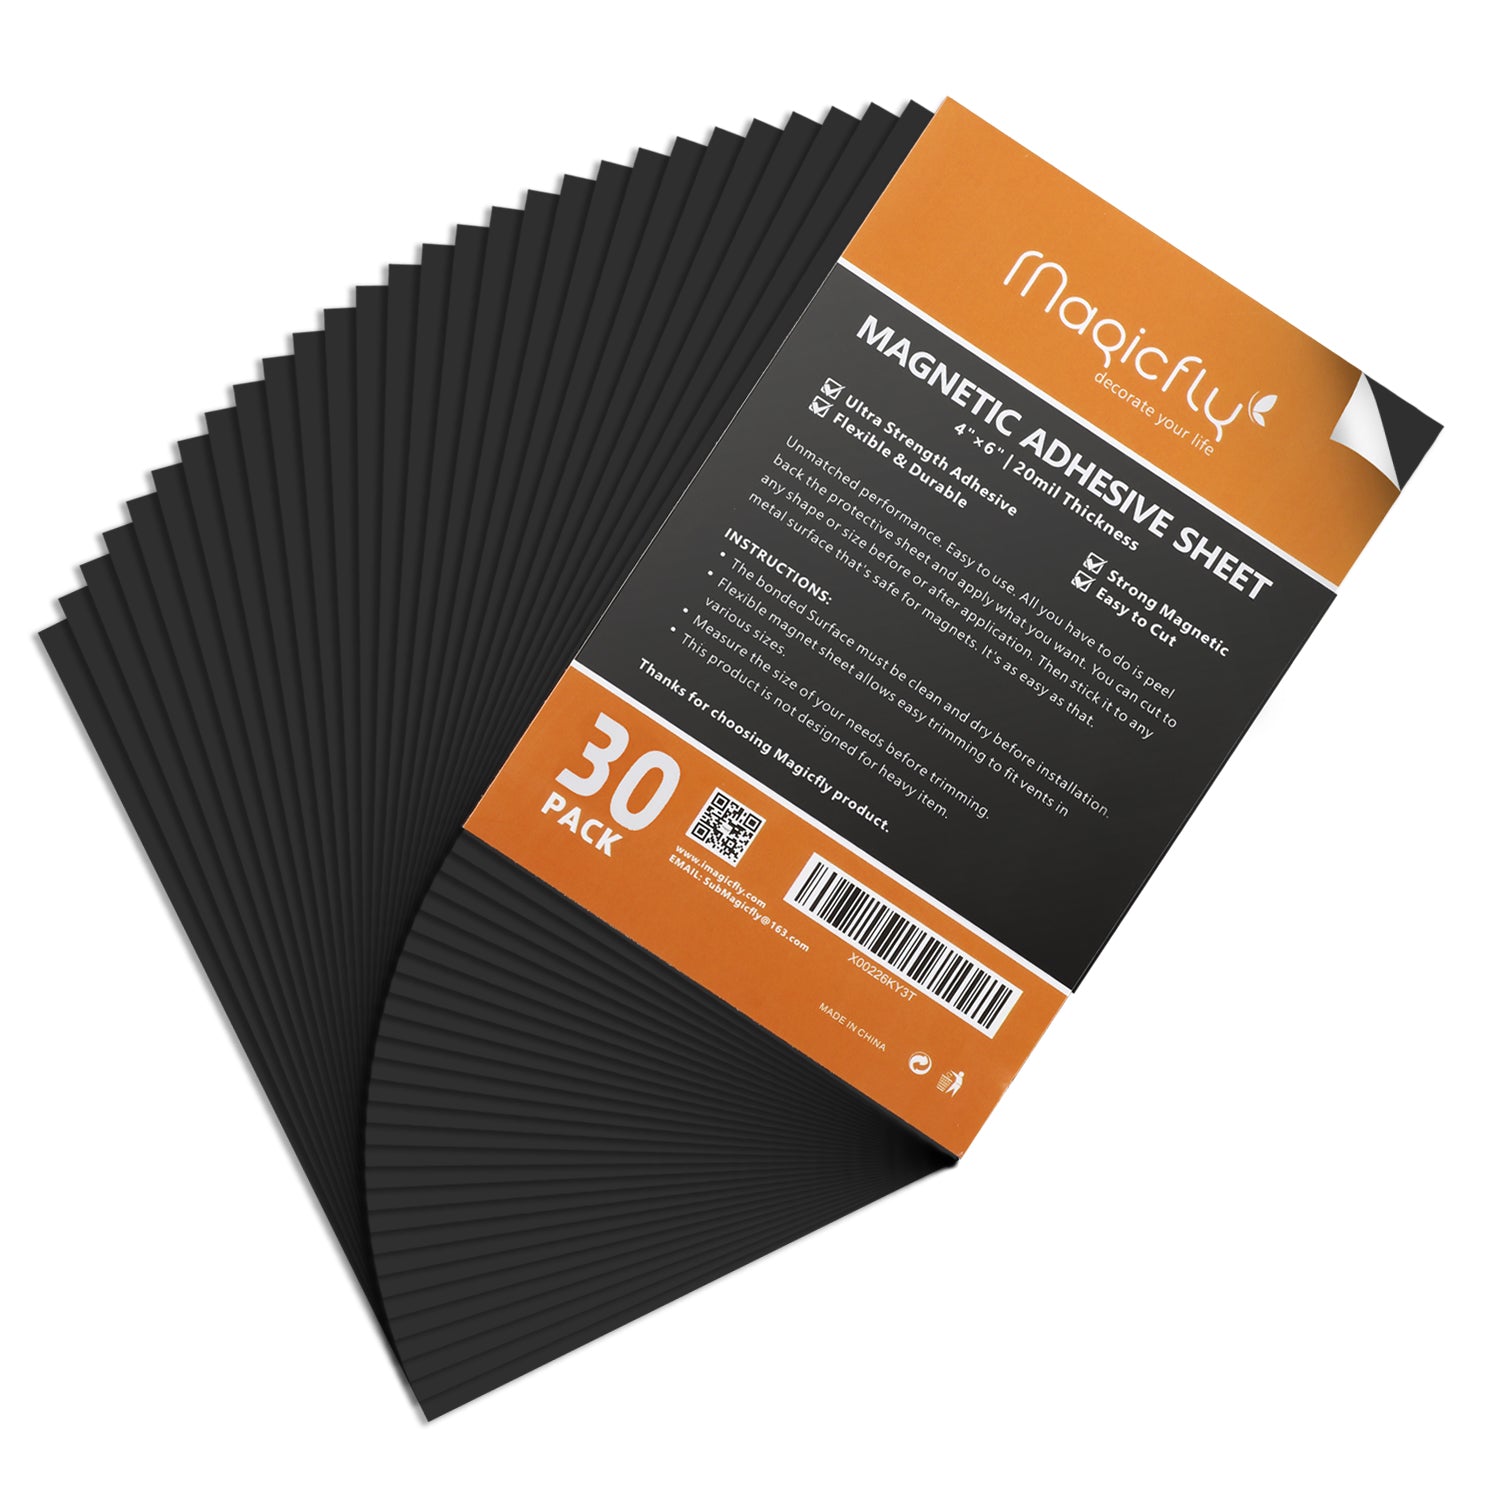 Adhesive Magnetic Sheets, 8 x 10, 4 Pack, Magnetic Sheet, Magnetic Paper,  Magnet Paper Sheets